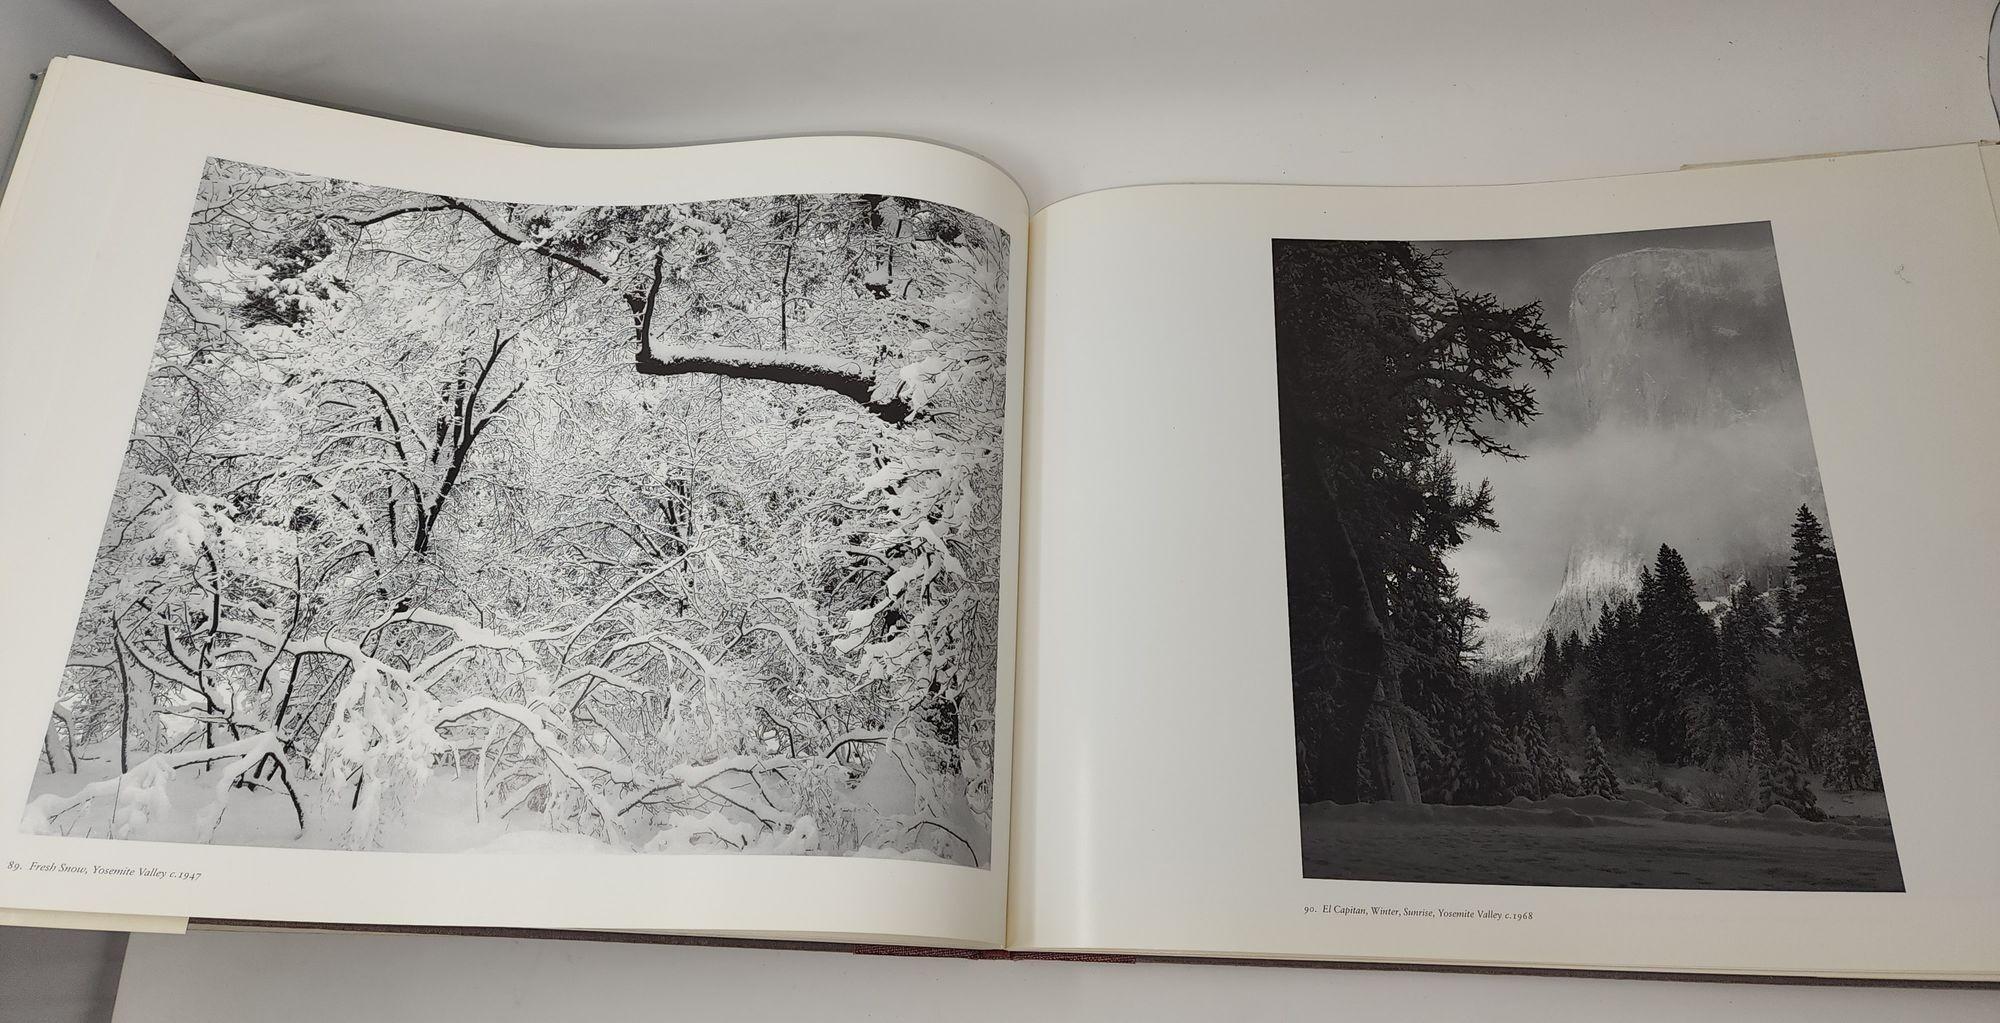 Yosemite and the Range of Light Ansel Adams Signed 1st Edition en vente 2